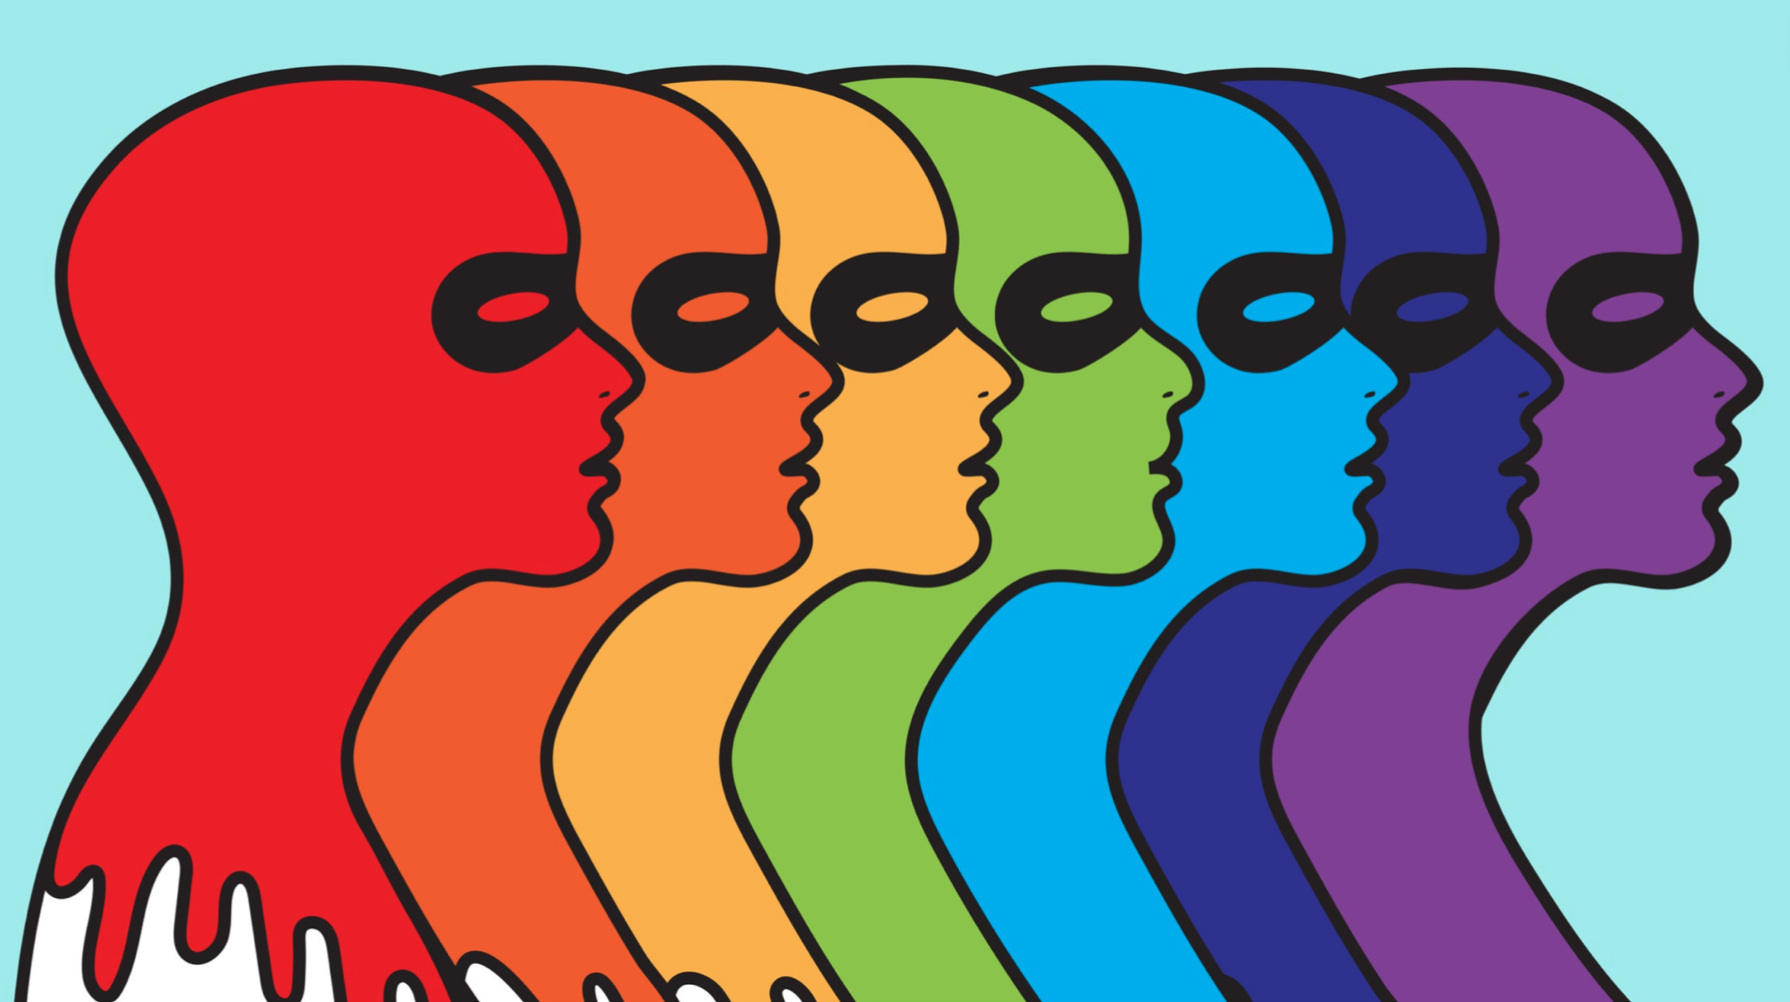  52 Mental Health Resources for Disabled People, POC, LGBTQ Folks, and More